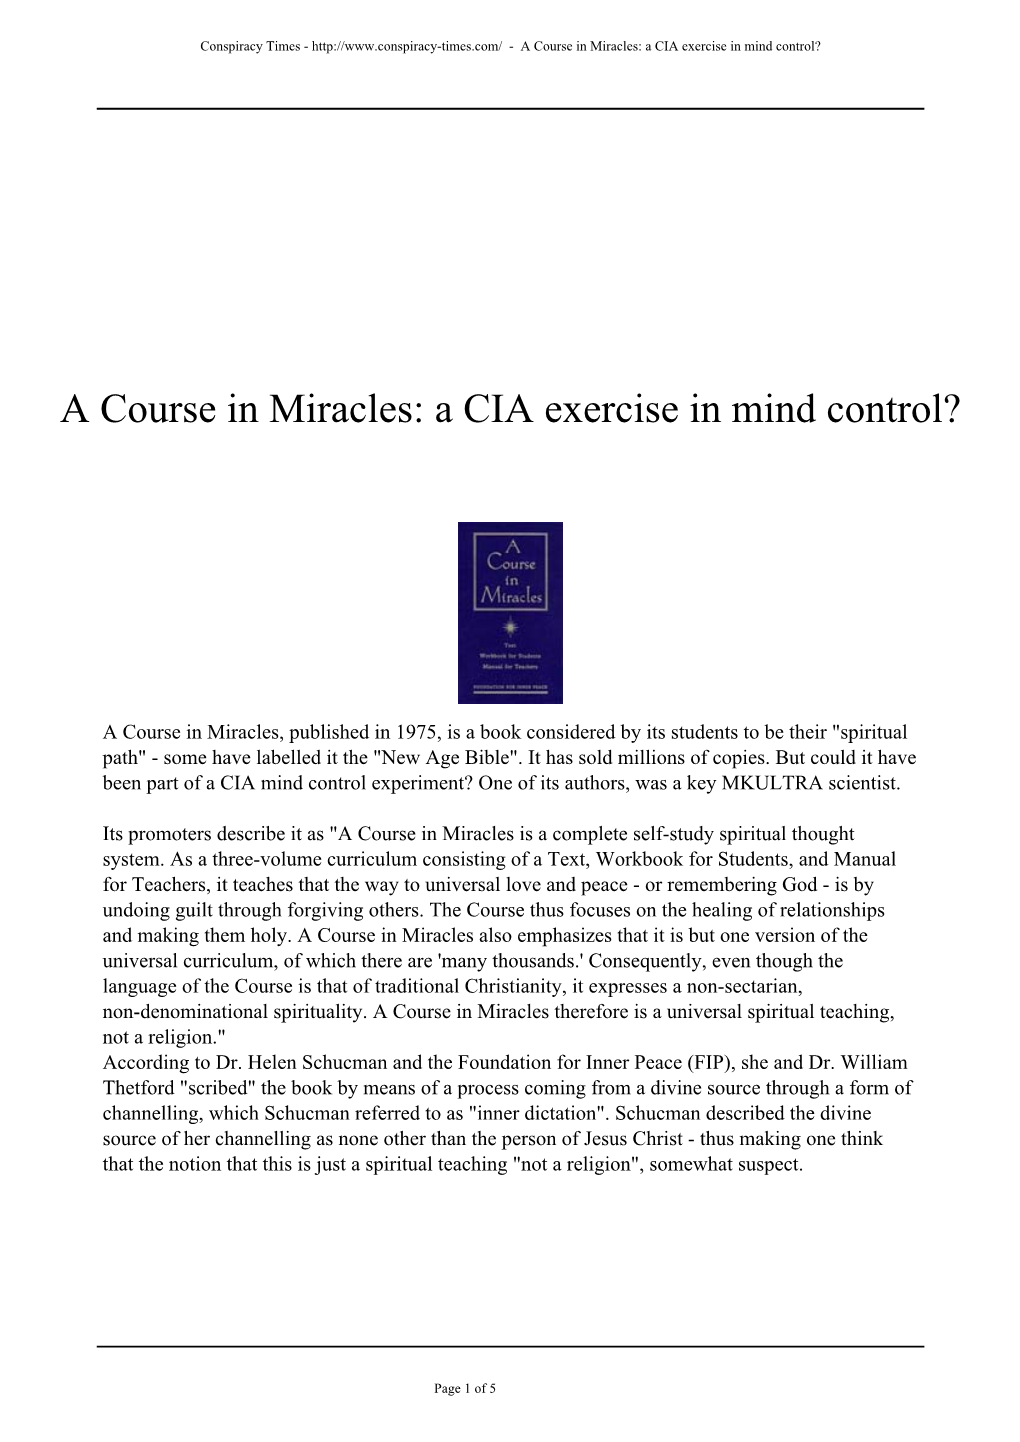 A Course in Miracles: a CIA Exercise in Mind Control?